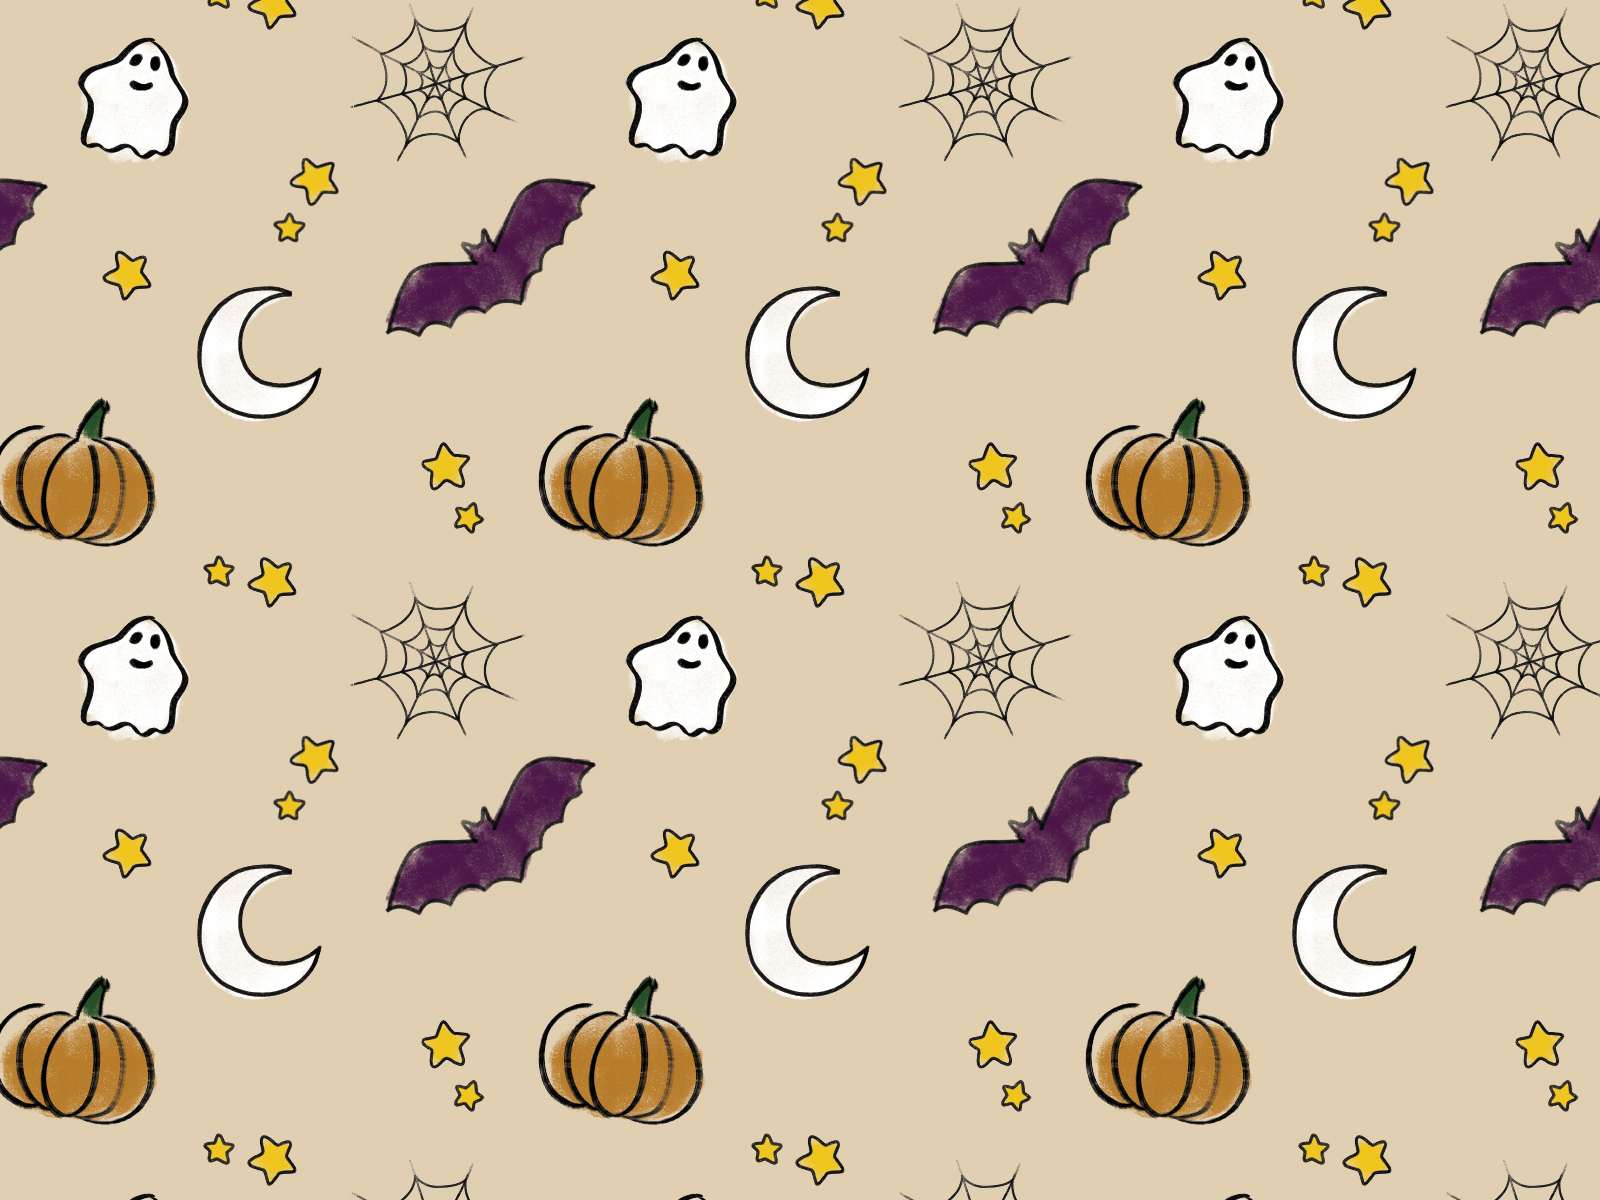 Spooky pattern by Emily Roberts on Dribbble